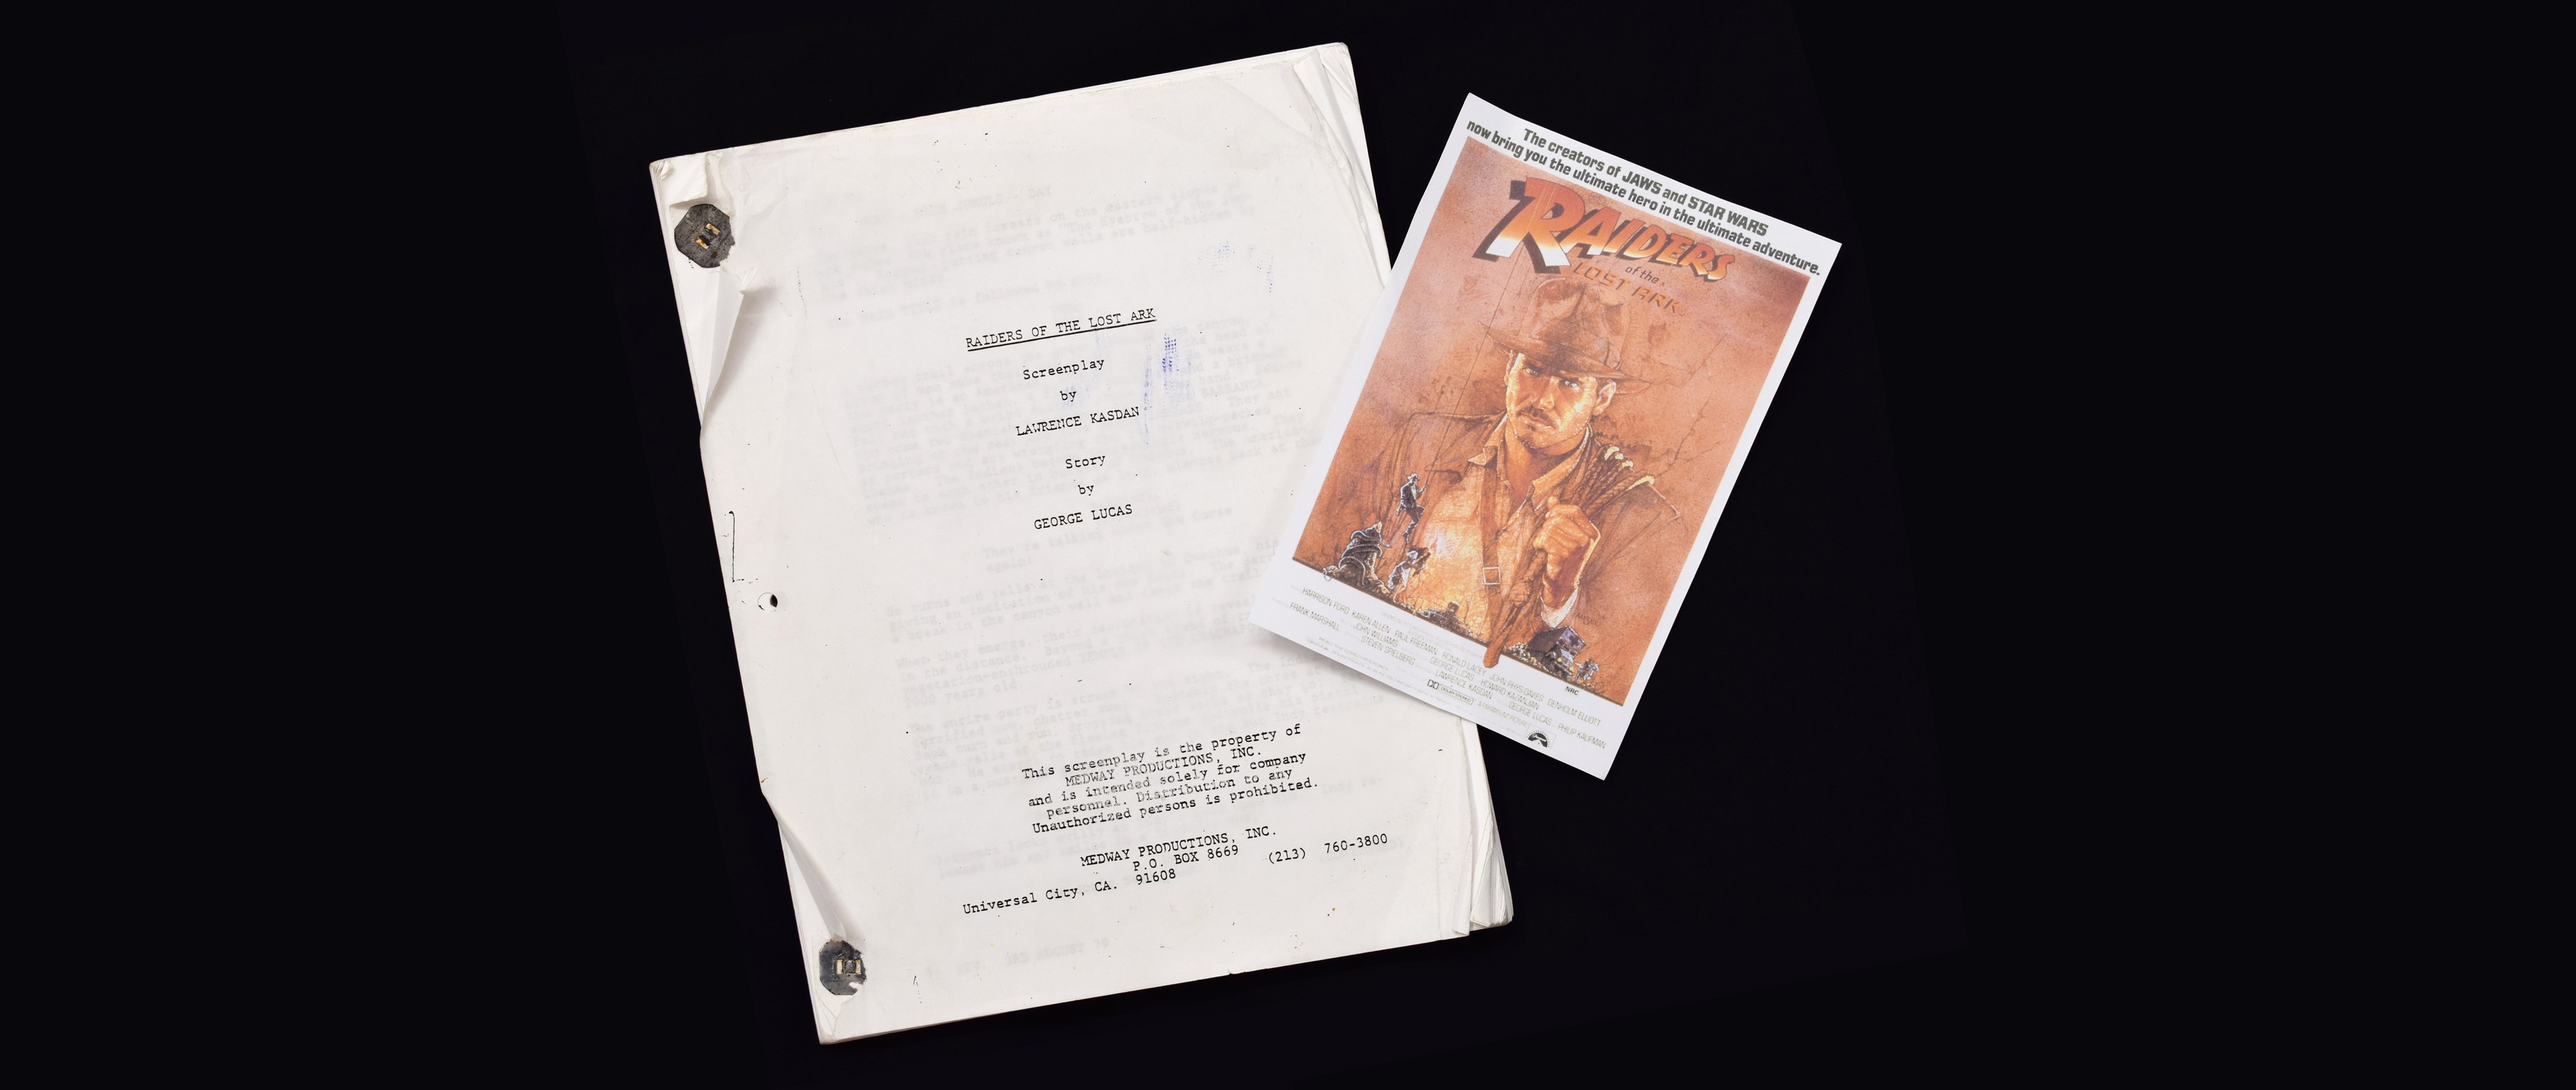 Unusual 'Raiders of the Lost Ark' script comes to Auction